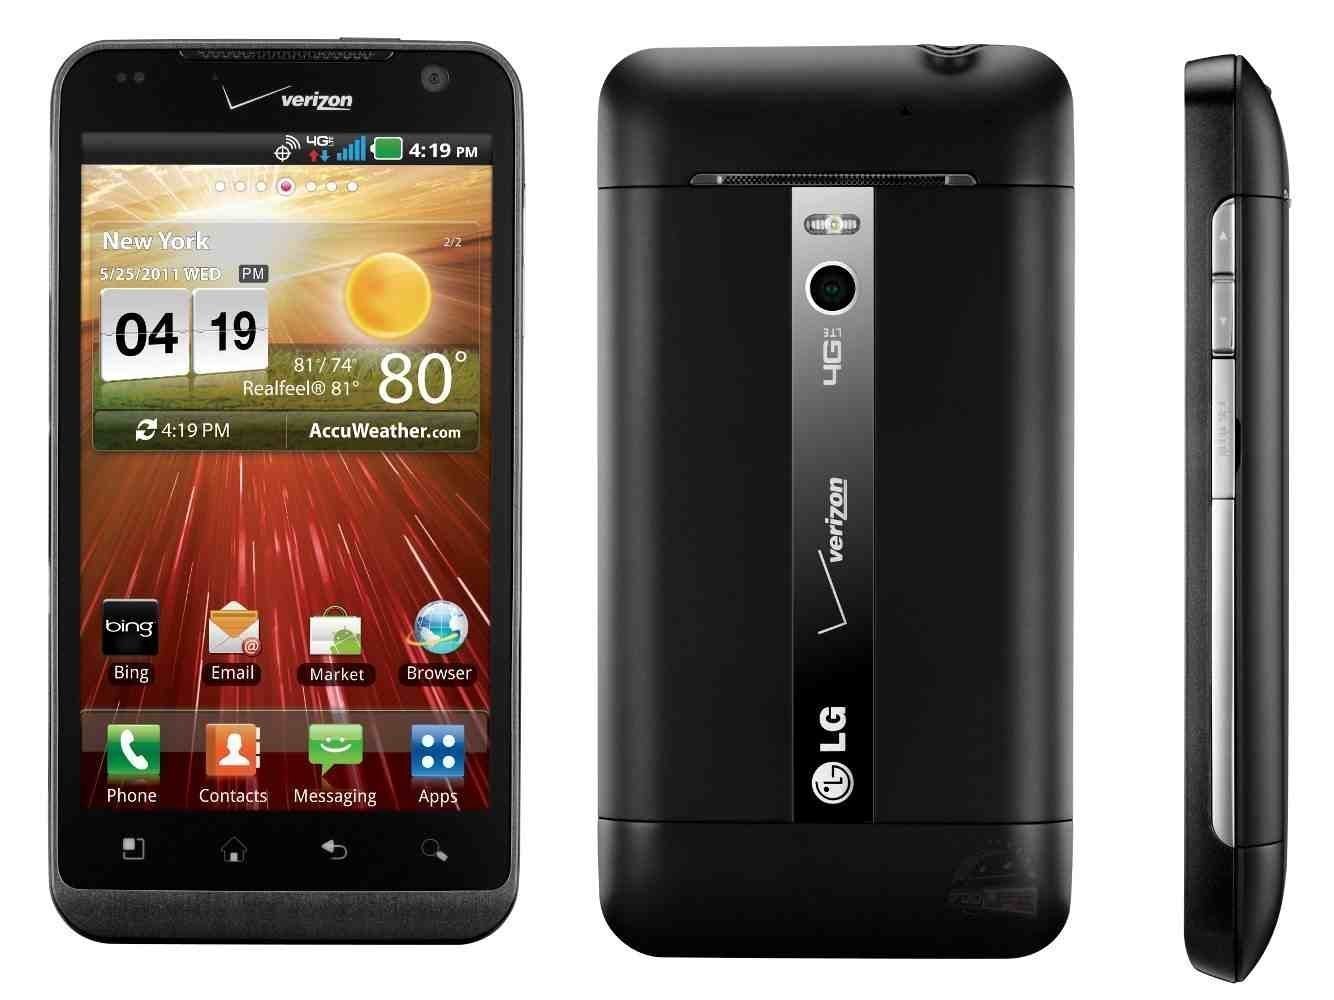 Primary image for LG Revolution VS910 Verizon 4G LTE phone Large 4.3-inch touch screen, 5-megapixe